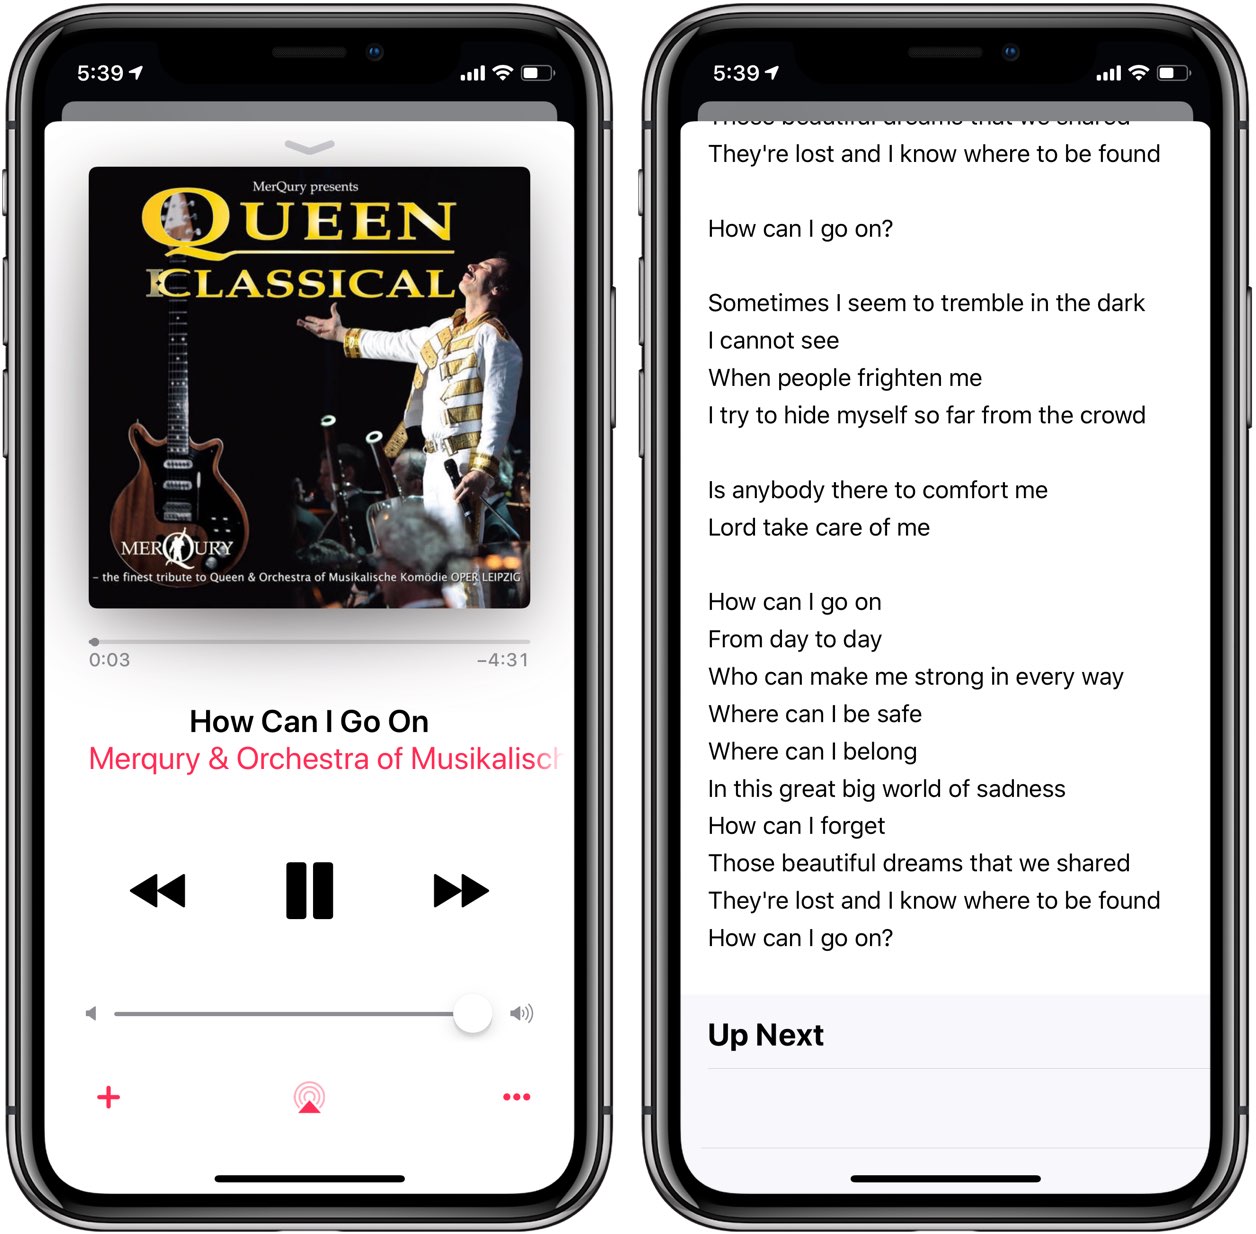 Lyrics search can work across Apple Music or be limited to your own music library